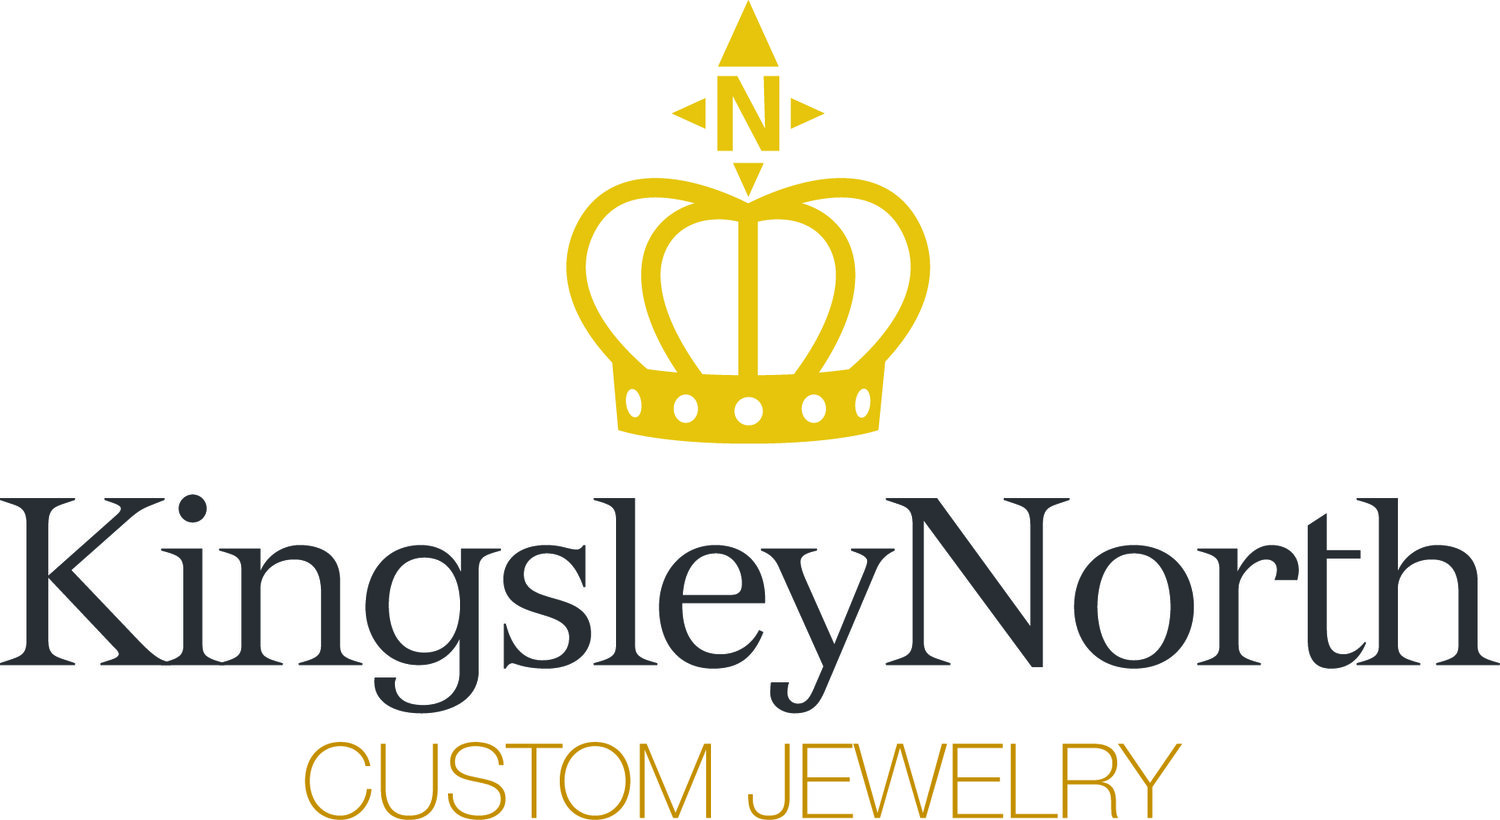 About us — Kingsley North Custom Jewelry